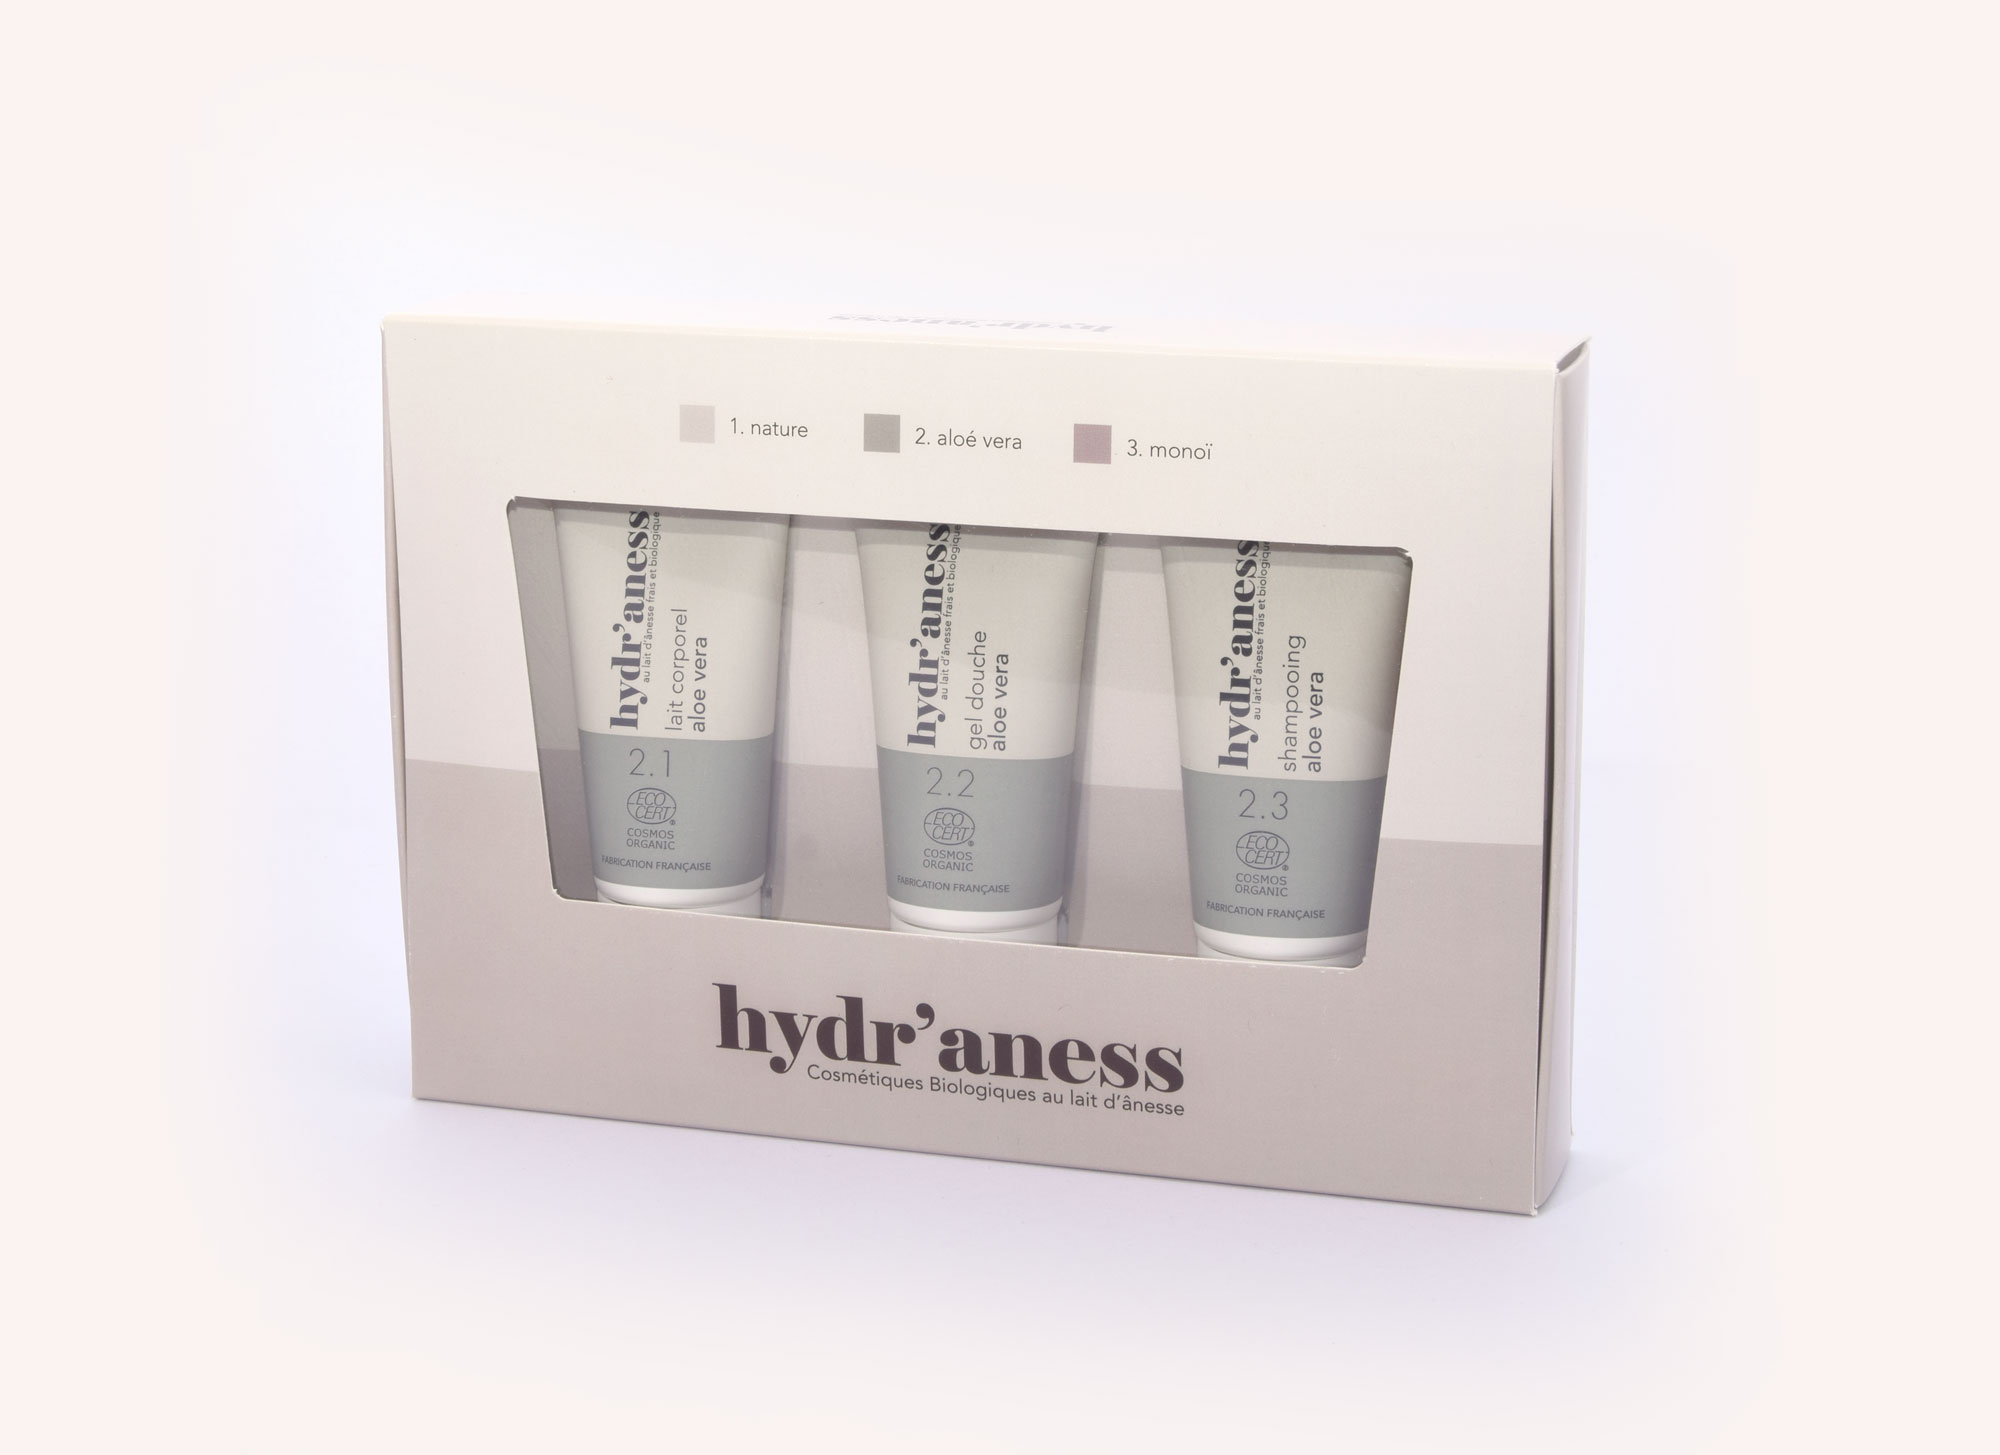 hydraness-packaging-boite-cosmetique